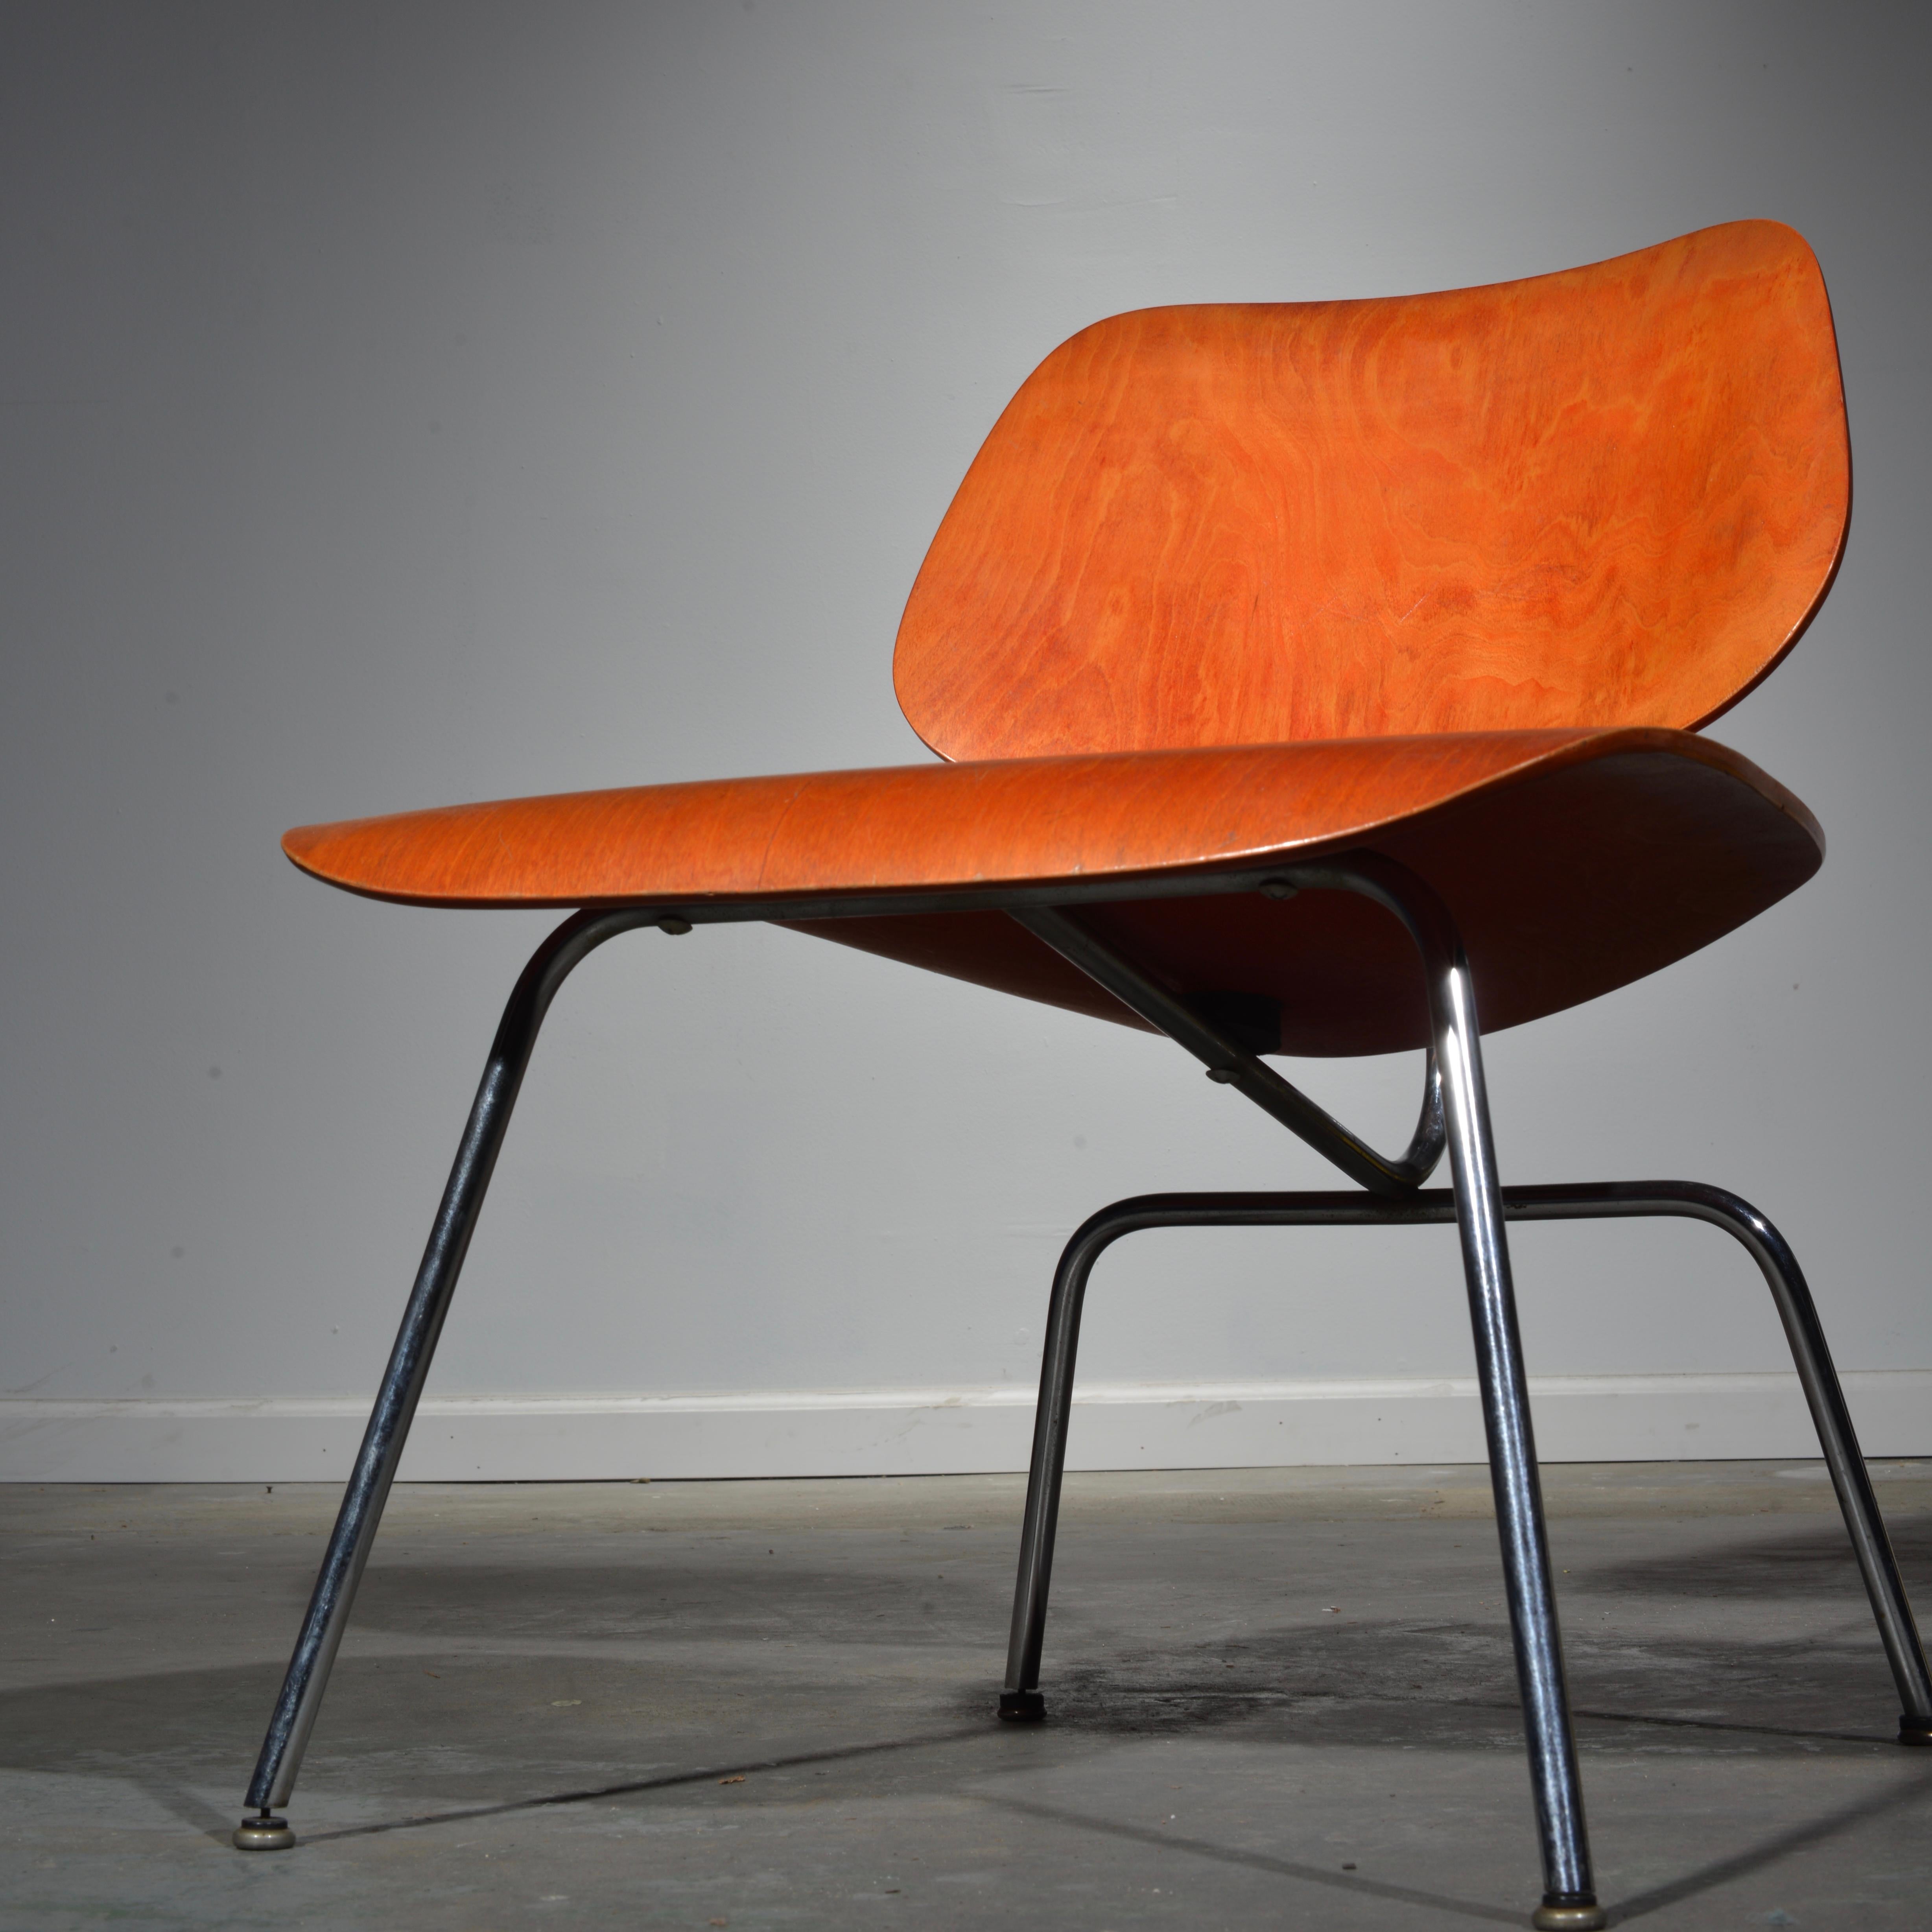 First Edition Evans Red Analine Lcm Chair by Charles and Ray Eames 2